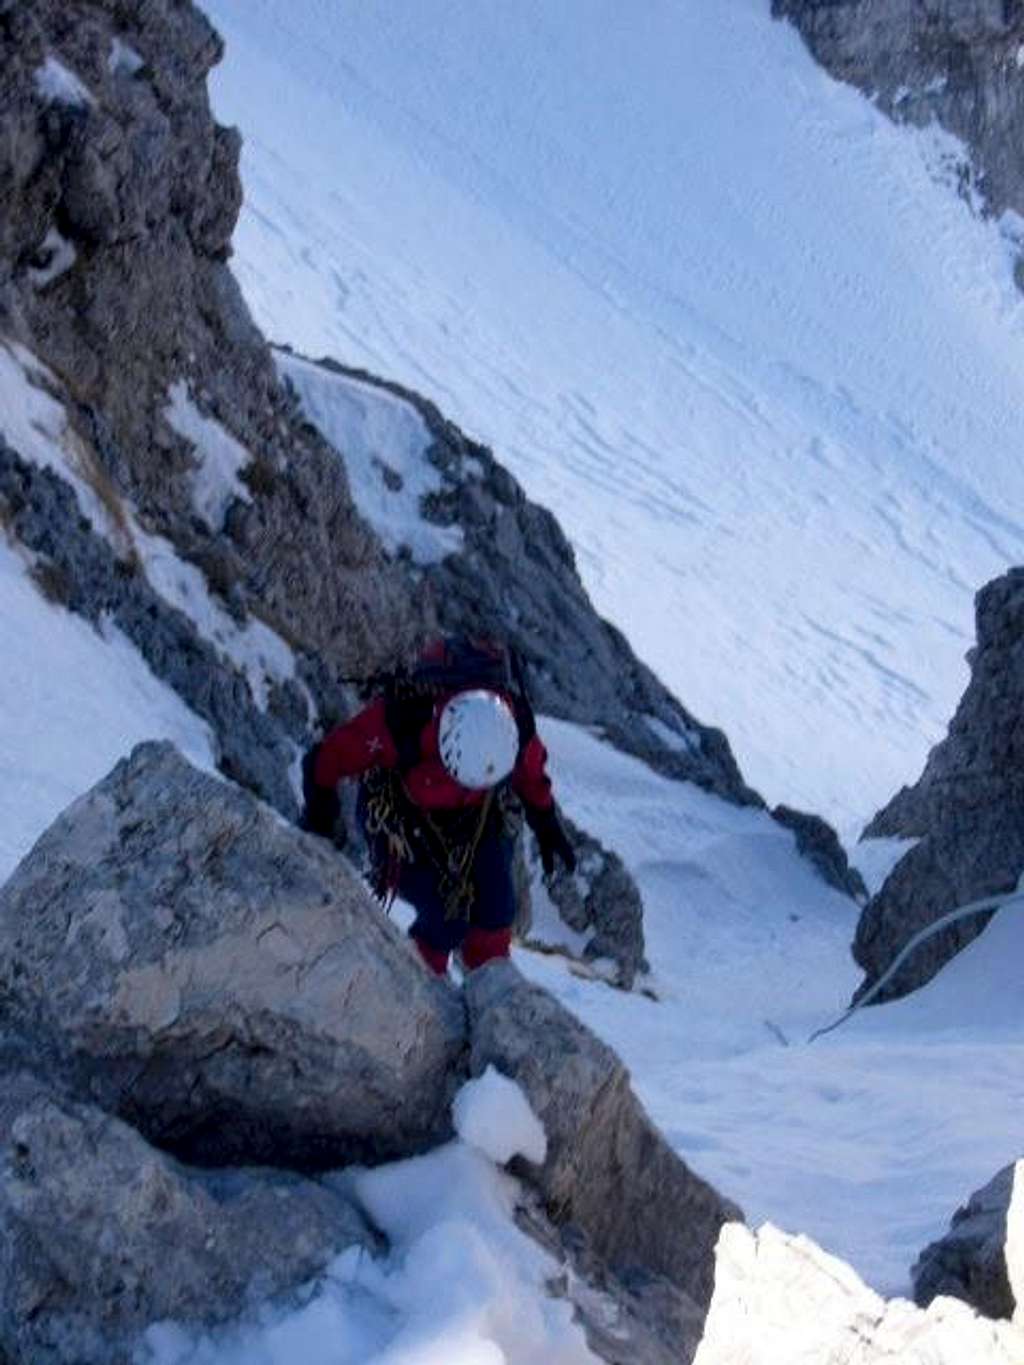 The final step of couloir 